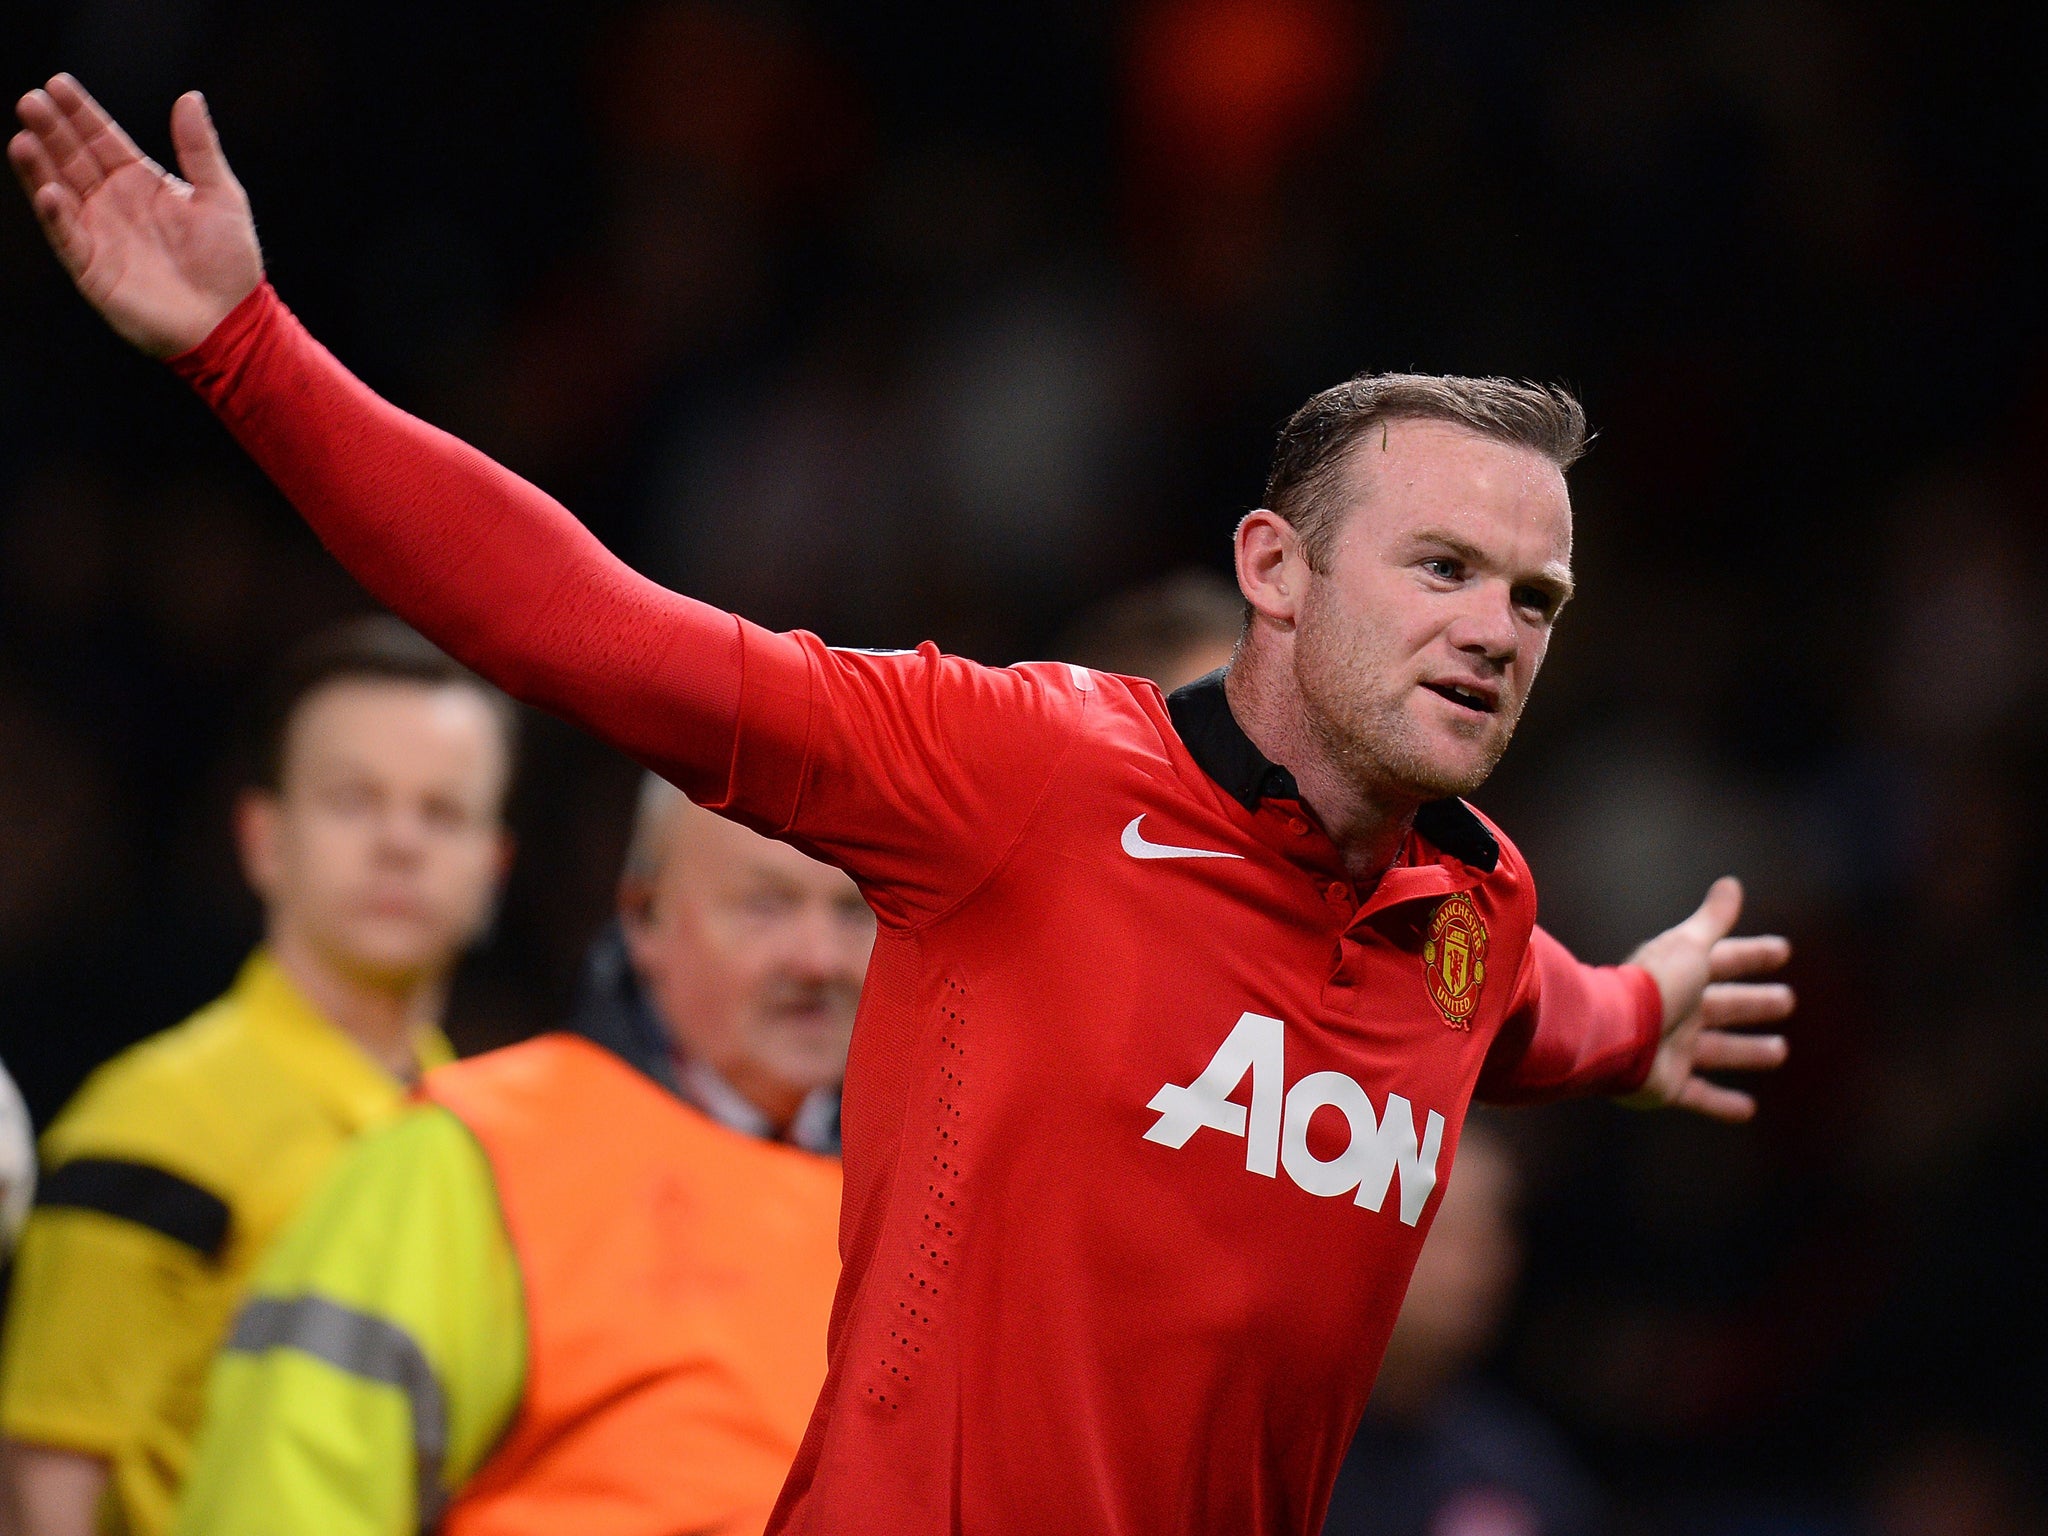 Wayne Rooney believes Manchester United are capable of winning this season's Champions League